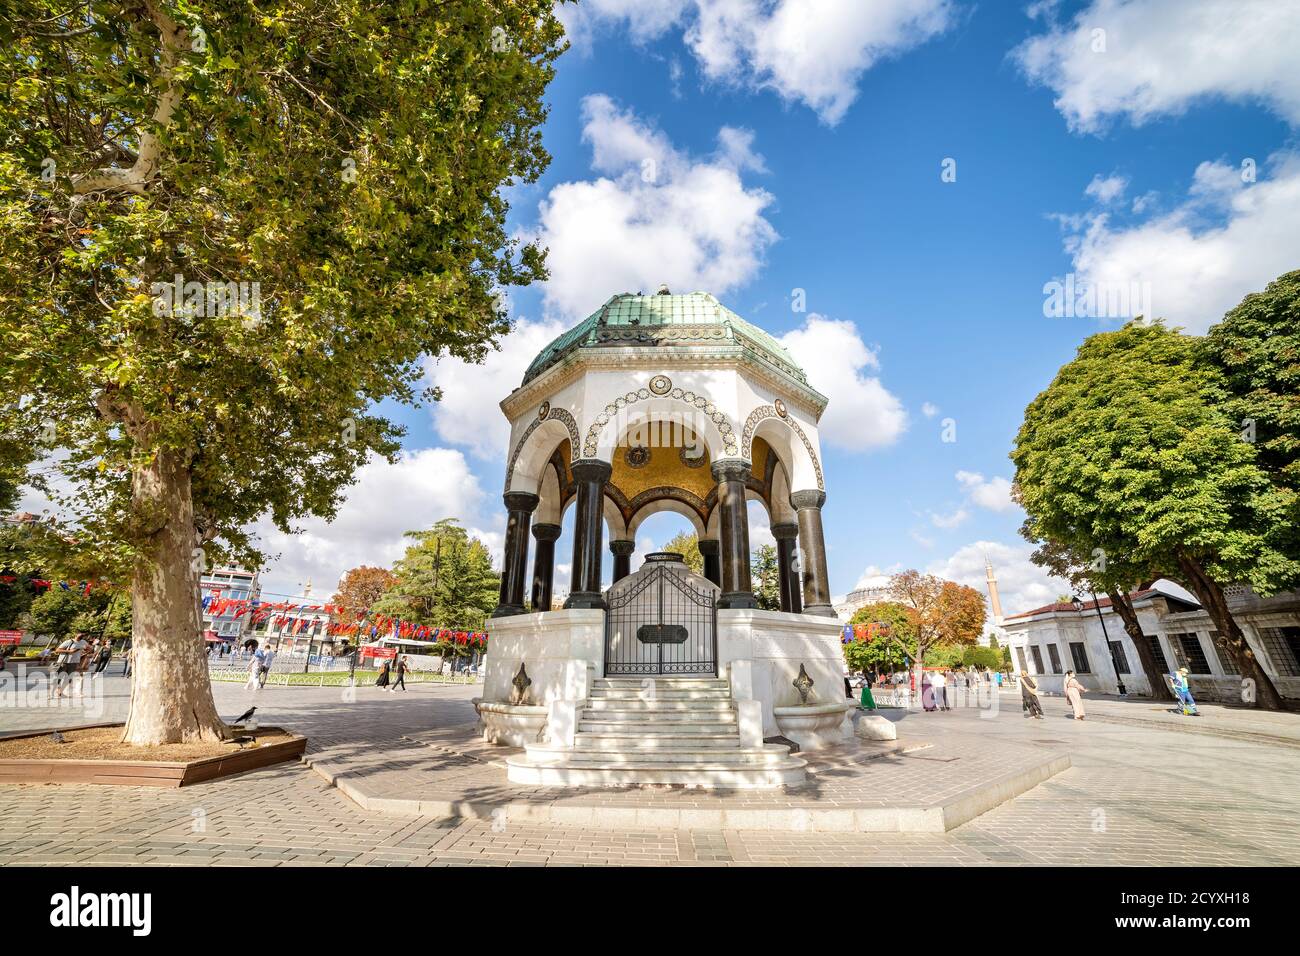 Wide angle view of German Fountain, a gazebo styled fountain in the northern end of old hippodrome (Sultanahmet Square), Istanbul, Turkey. Stock Photo